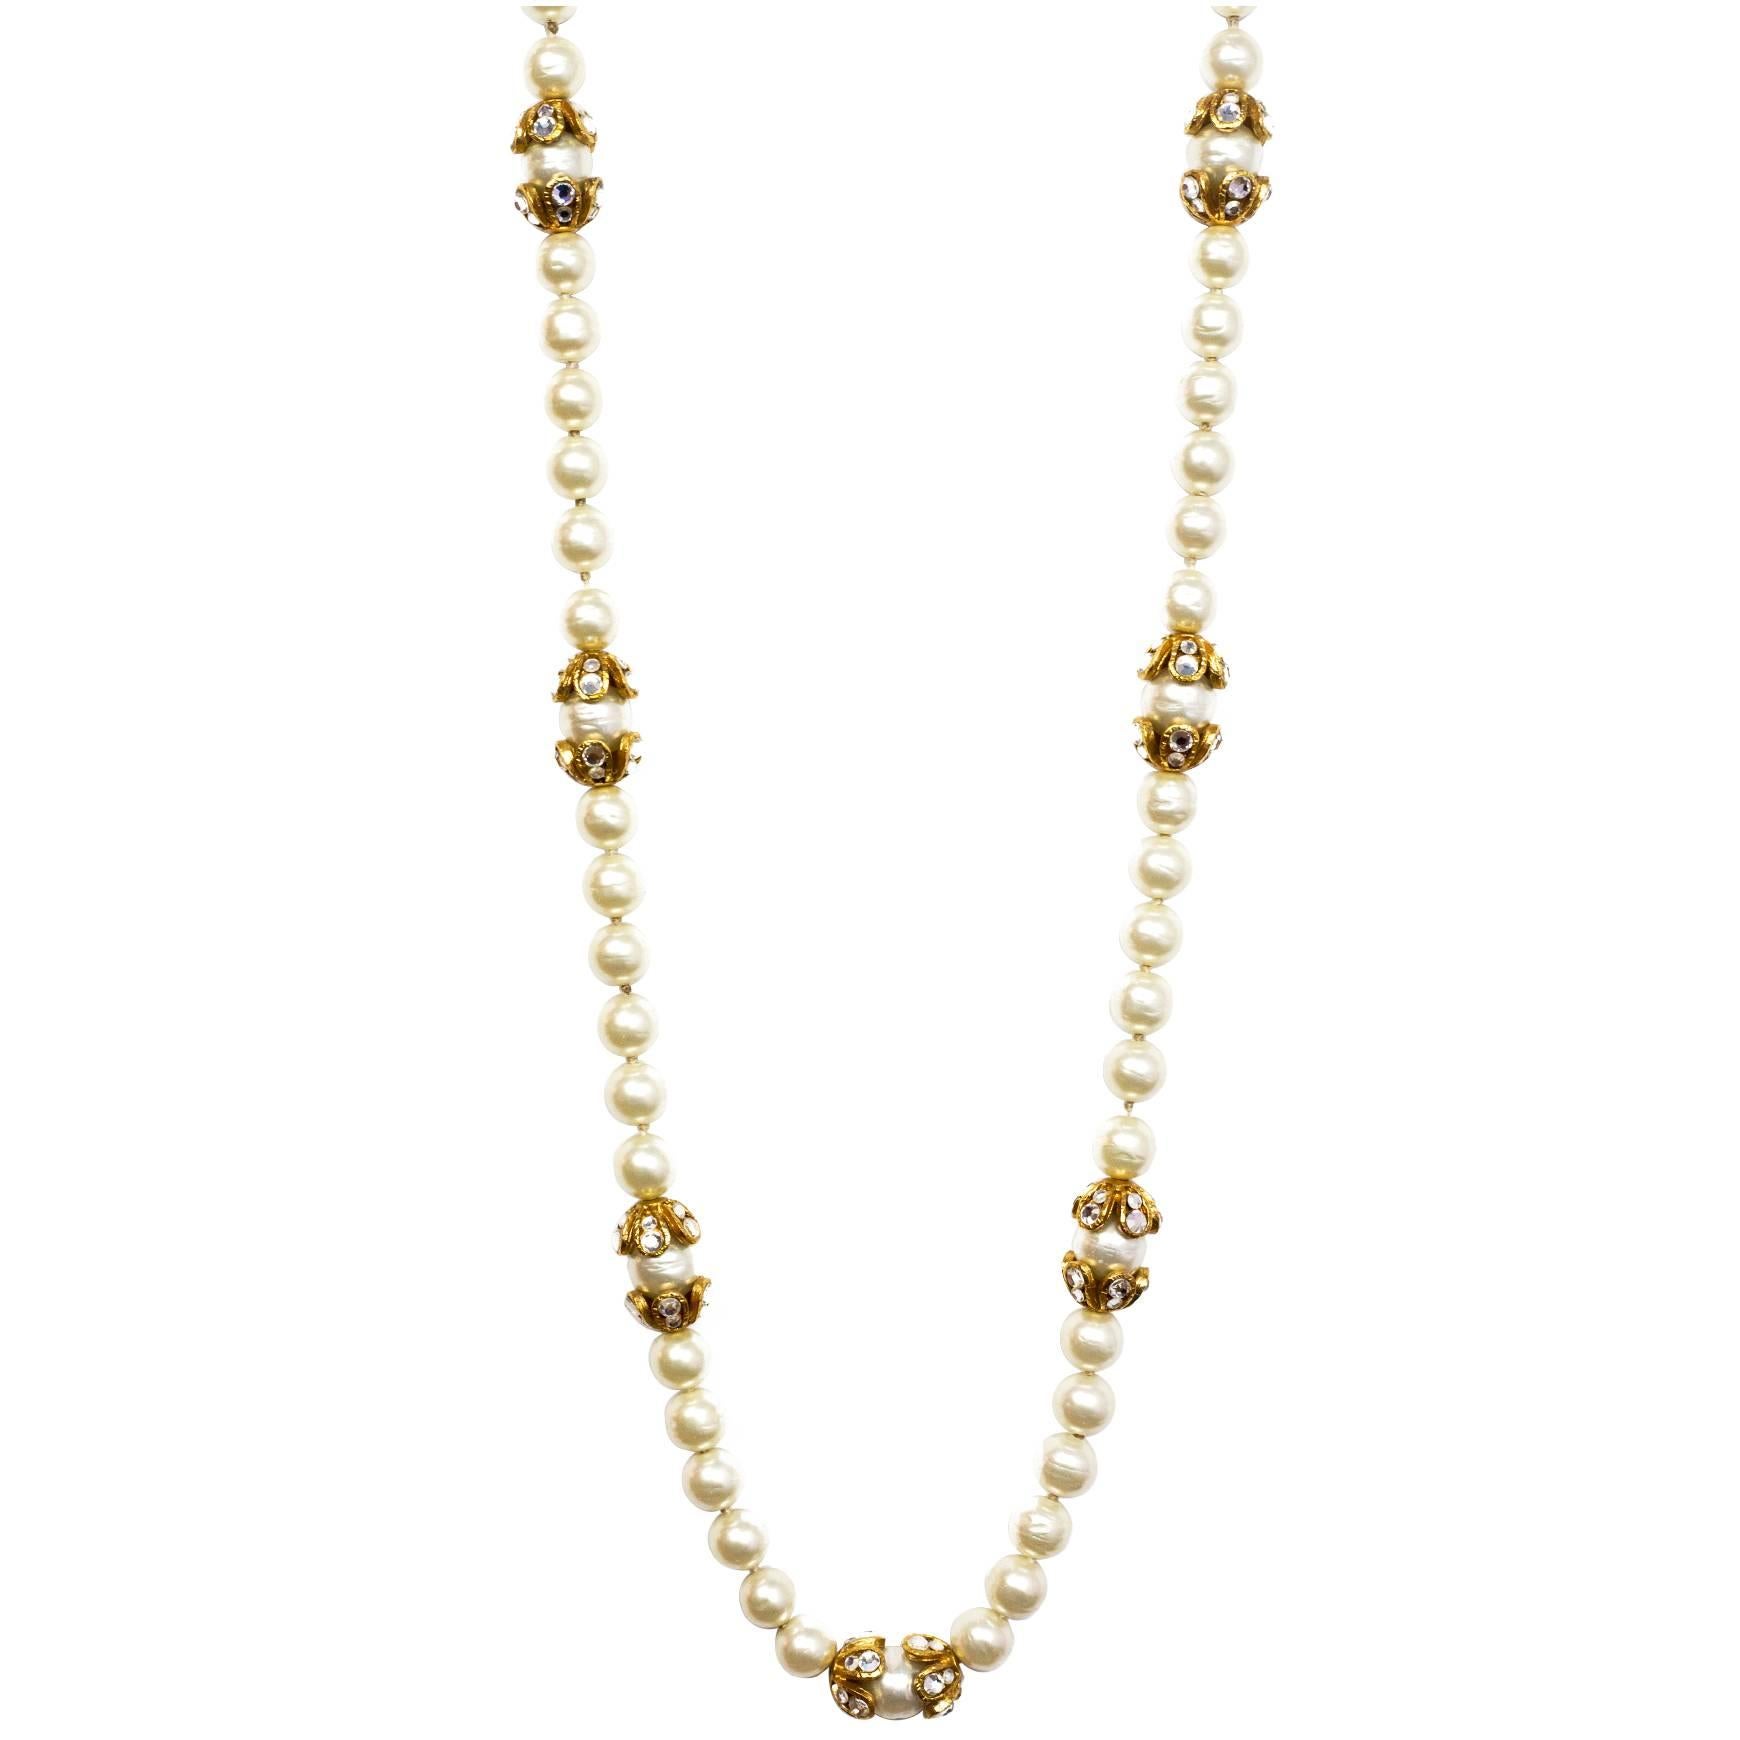 Chanel Vintage '96 Pearl & Crystal Long Necklace